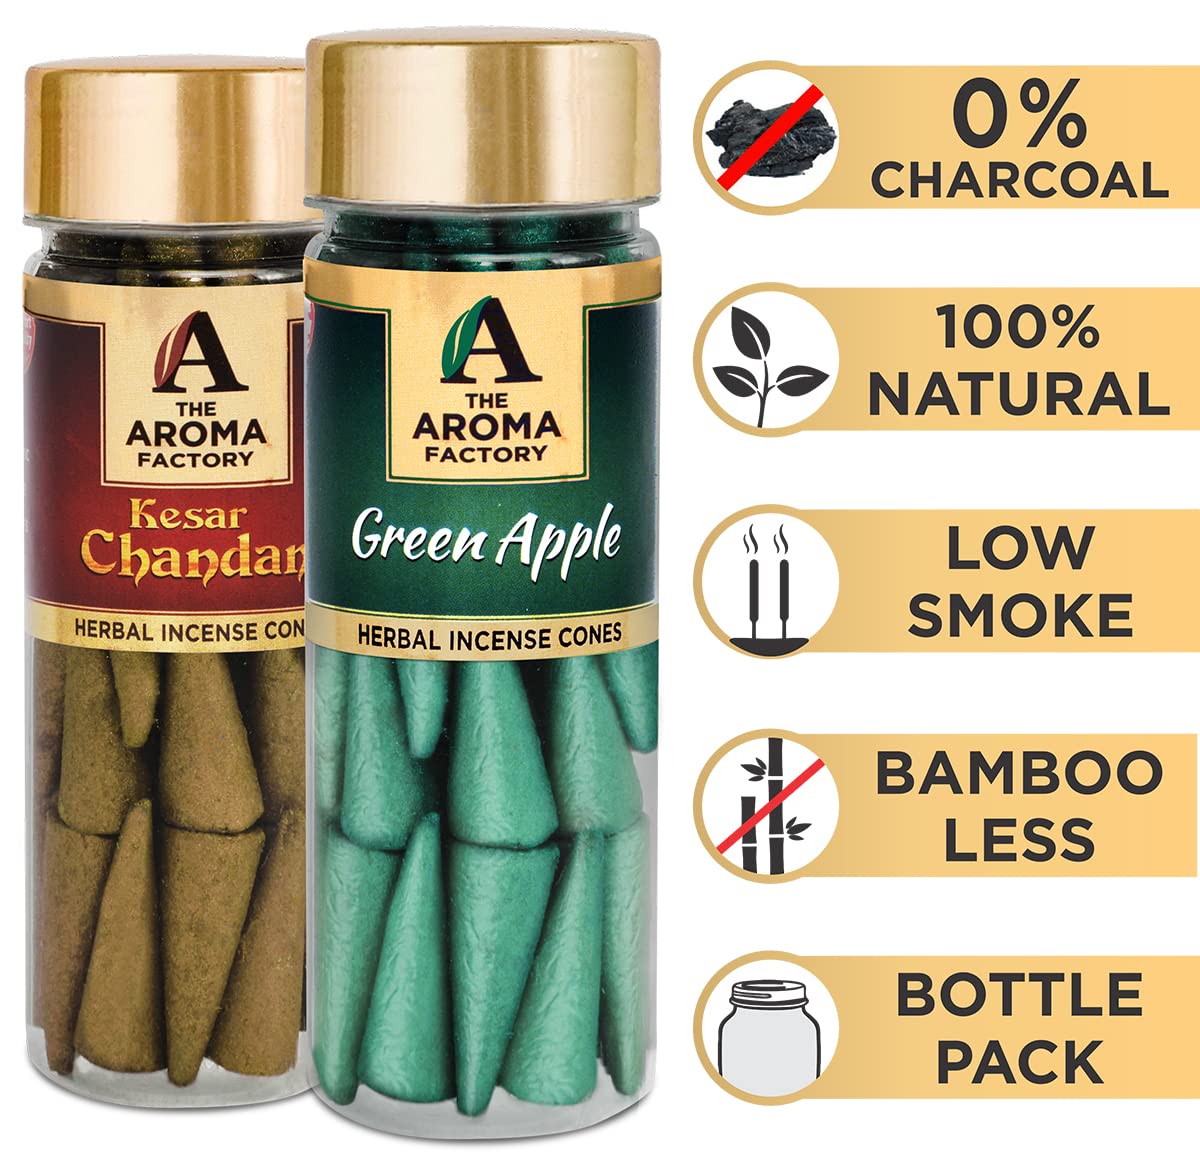 The Aroma Factory Incense Dhoop Cone for Pooja, Kesar Chandan & Green Apple (100% Herbal & 0% Charcoal) 2 Bottles x 30 Cones